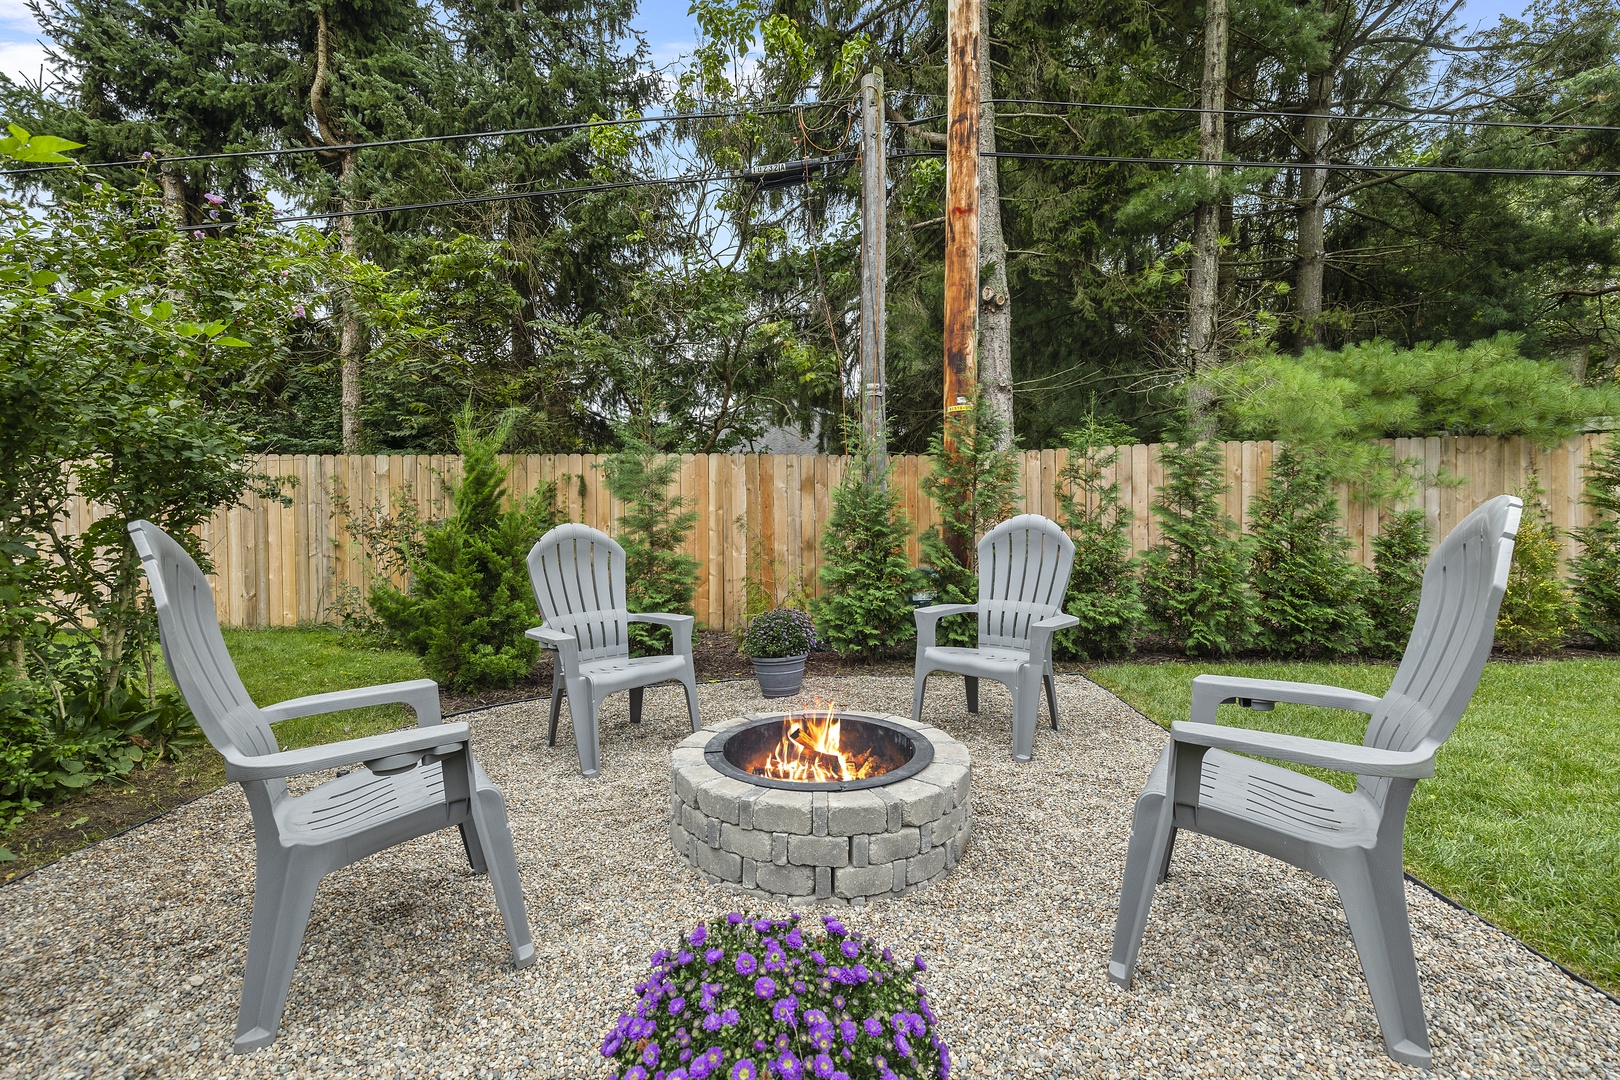 Spend a relaxing evening around the fire pit after a day of exploring SW MI.